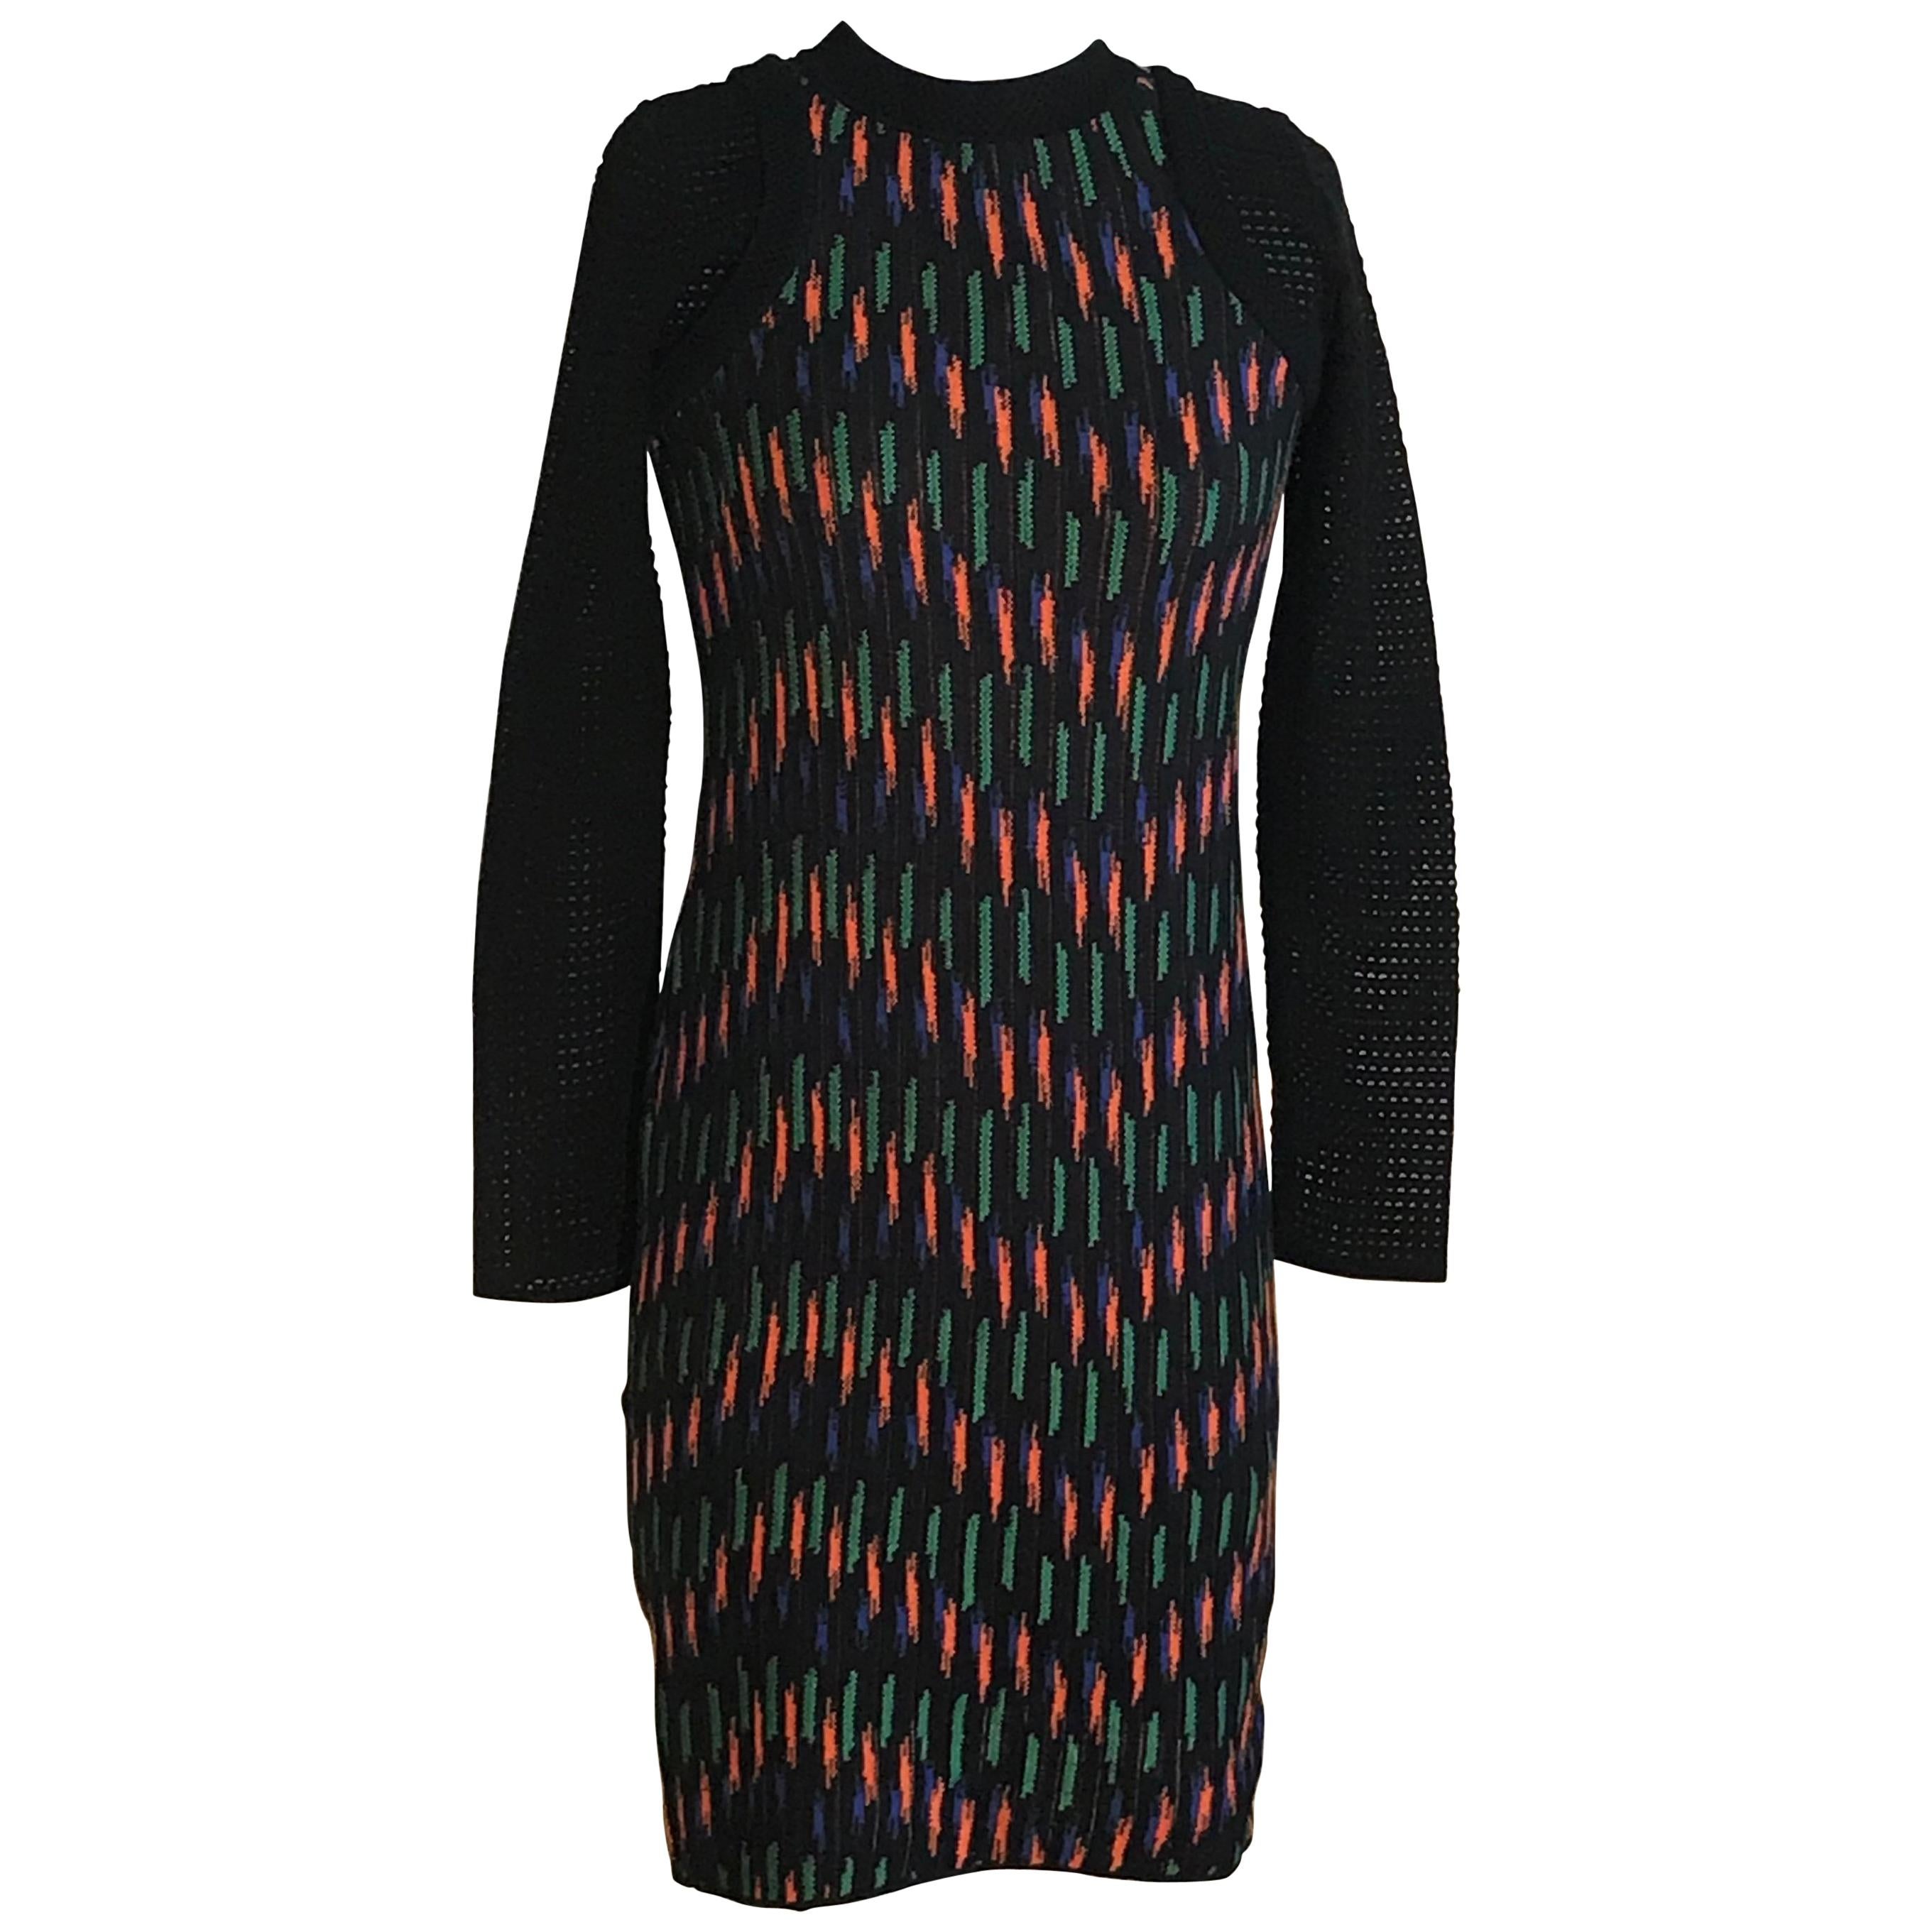 New M Missoni Black Orange Blue Green Knit Sweater Dress with Mesh Knit Sleeves For Sale